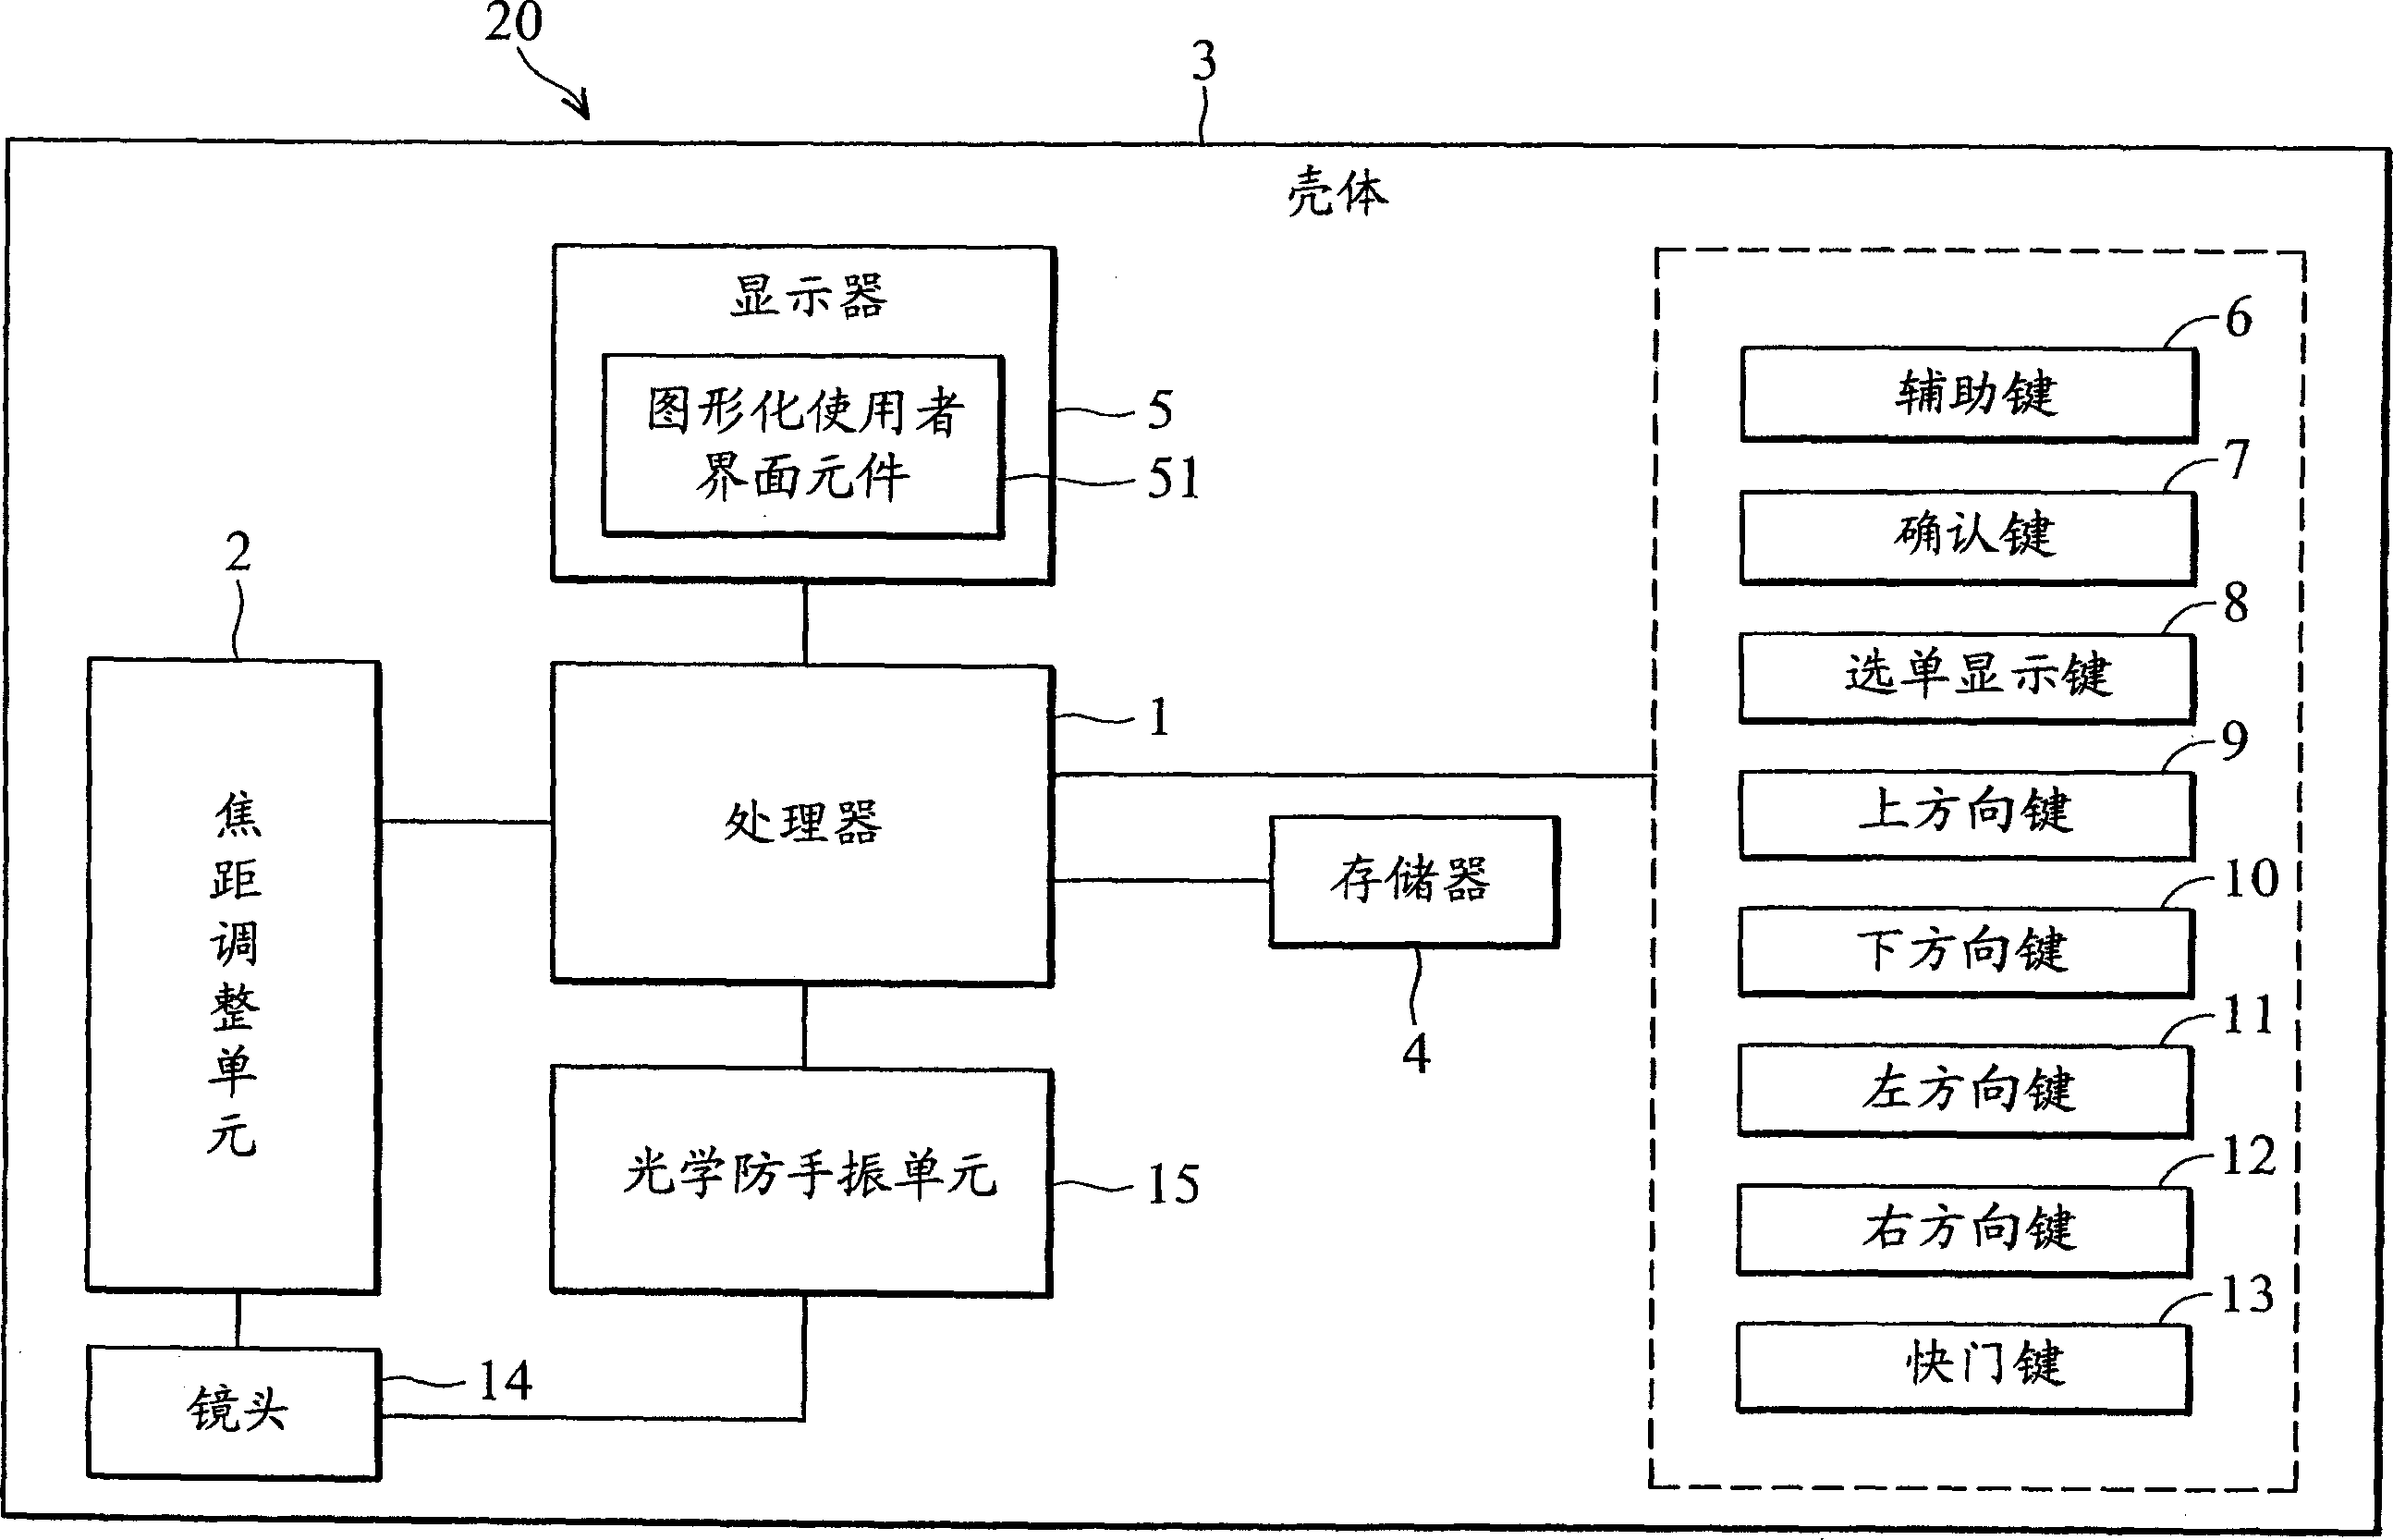 Hand-held image acquisition system and its controlling method